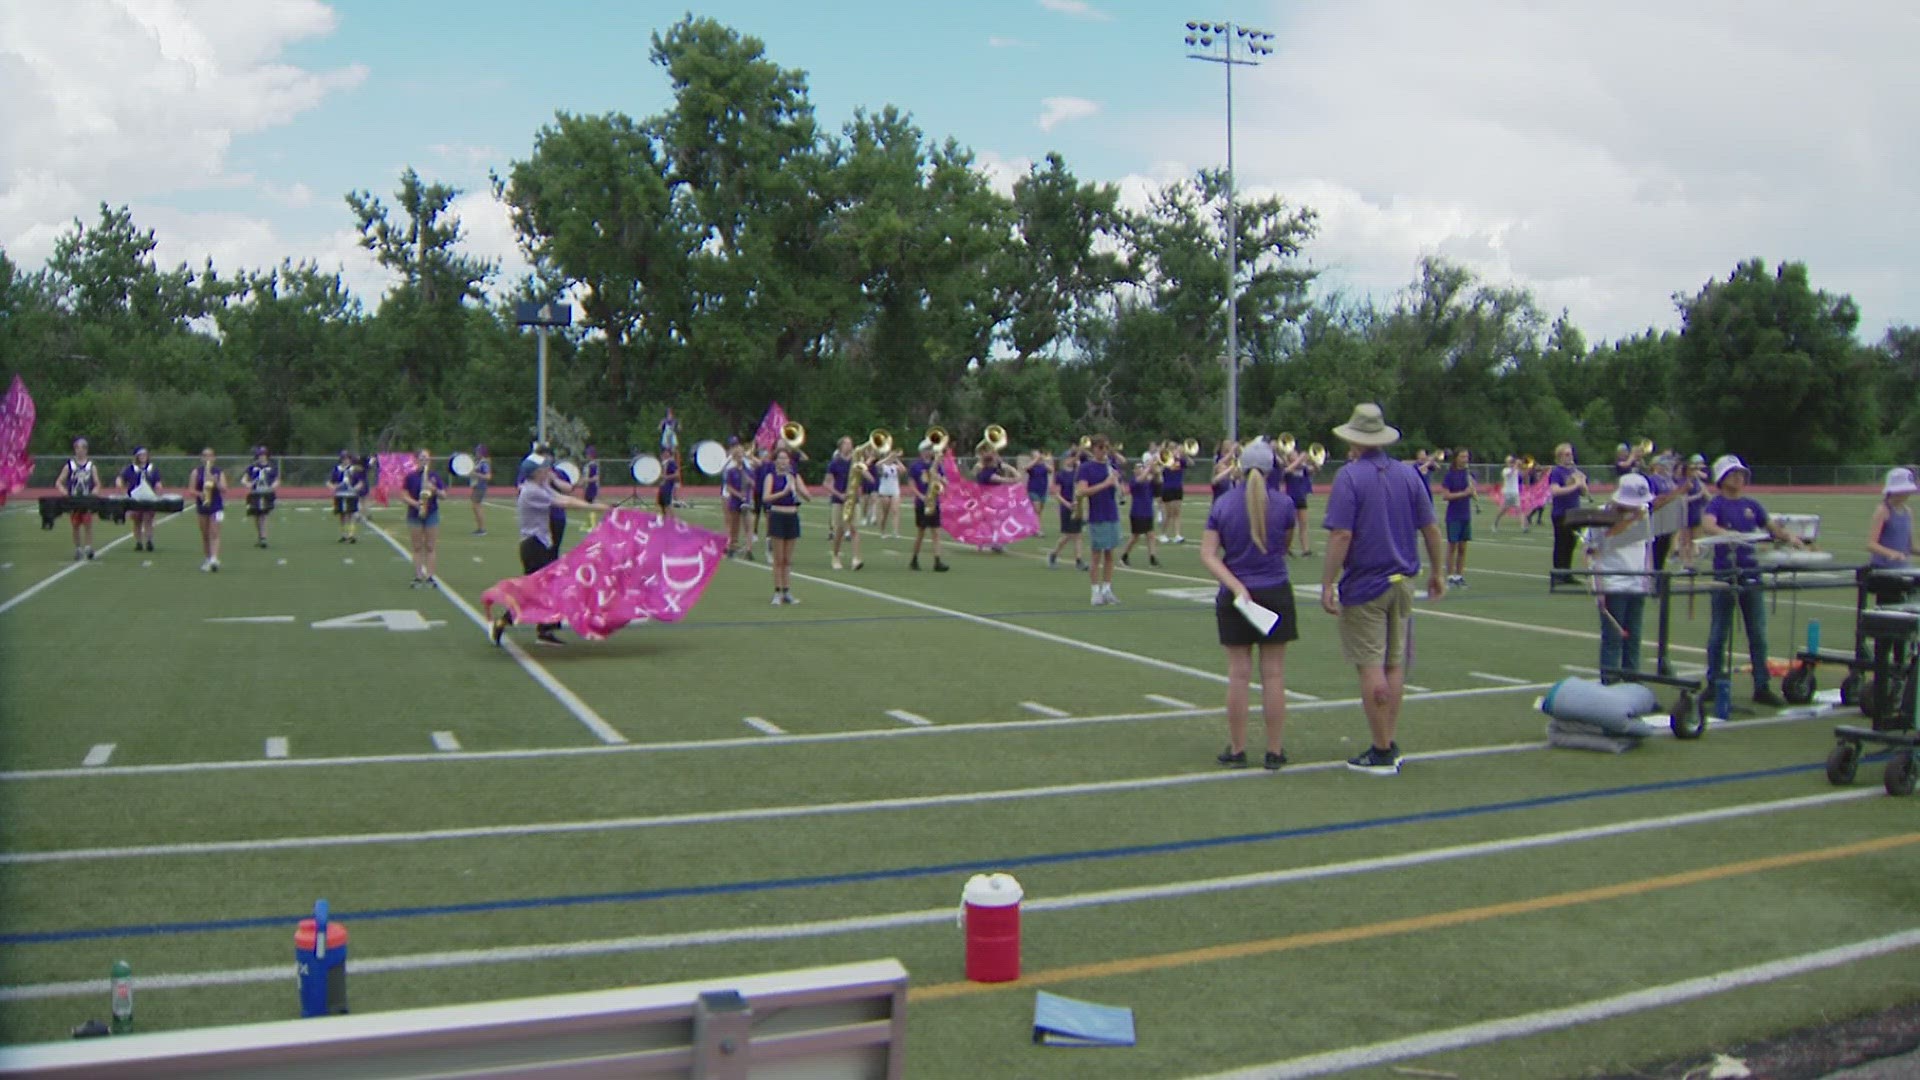 The Littleton High School marching band is gearing up for this season after last year's historic finish in the 4A state finals.